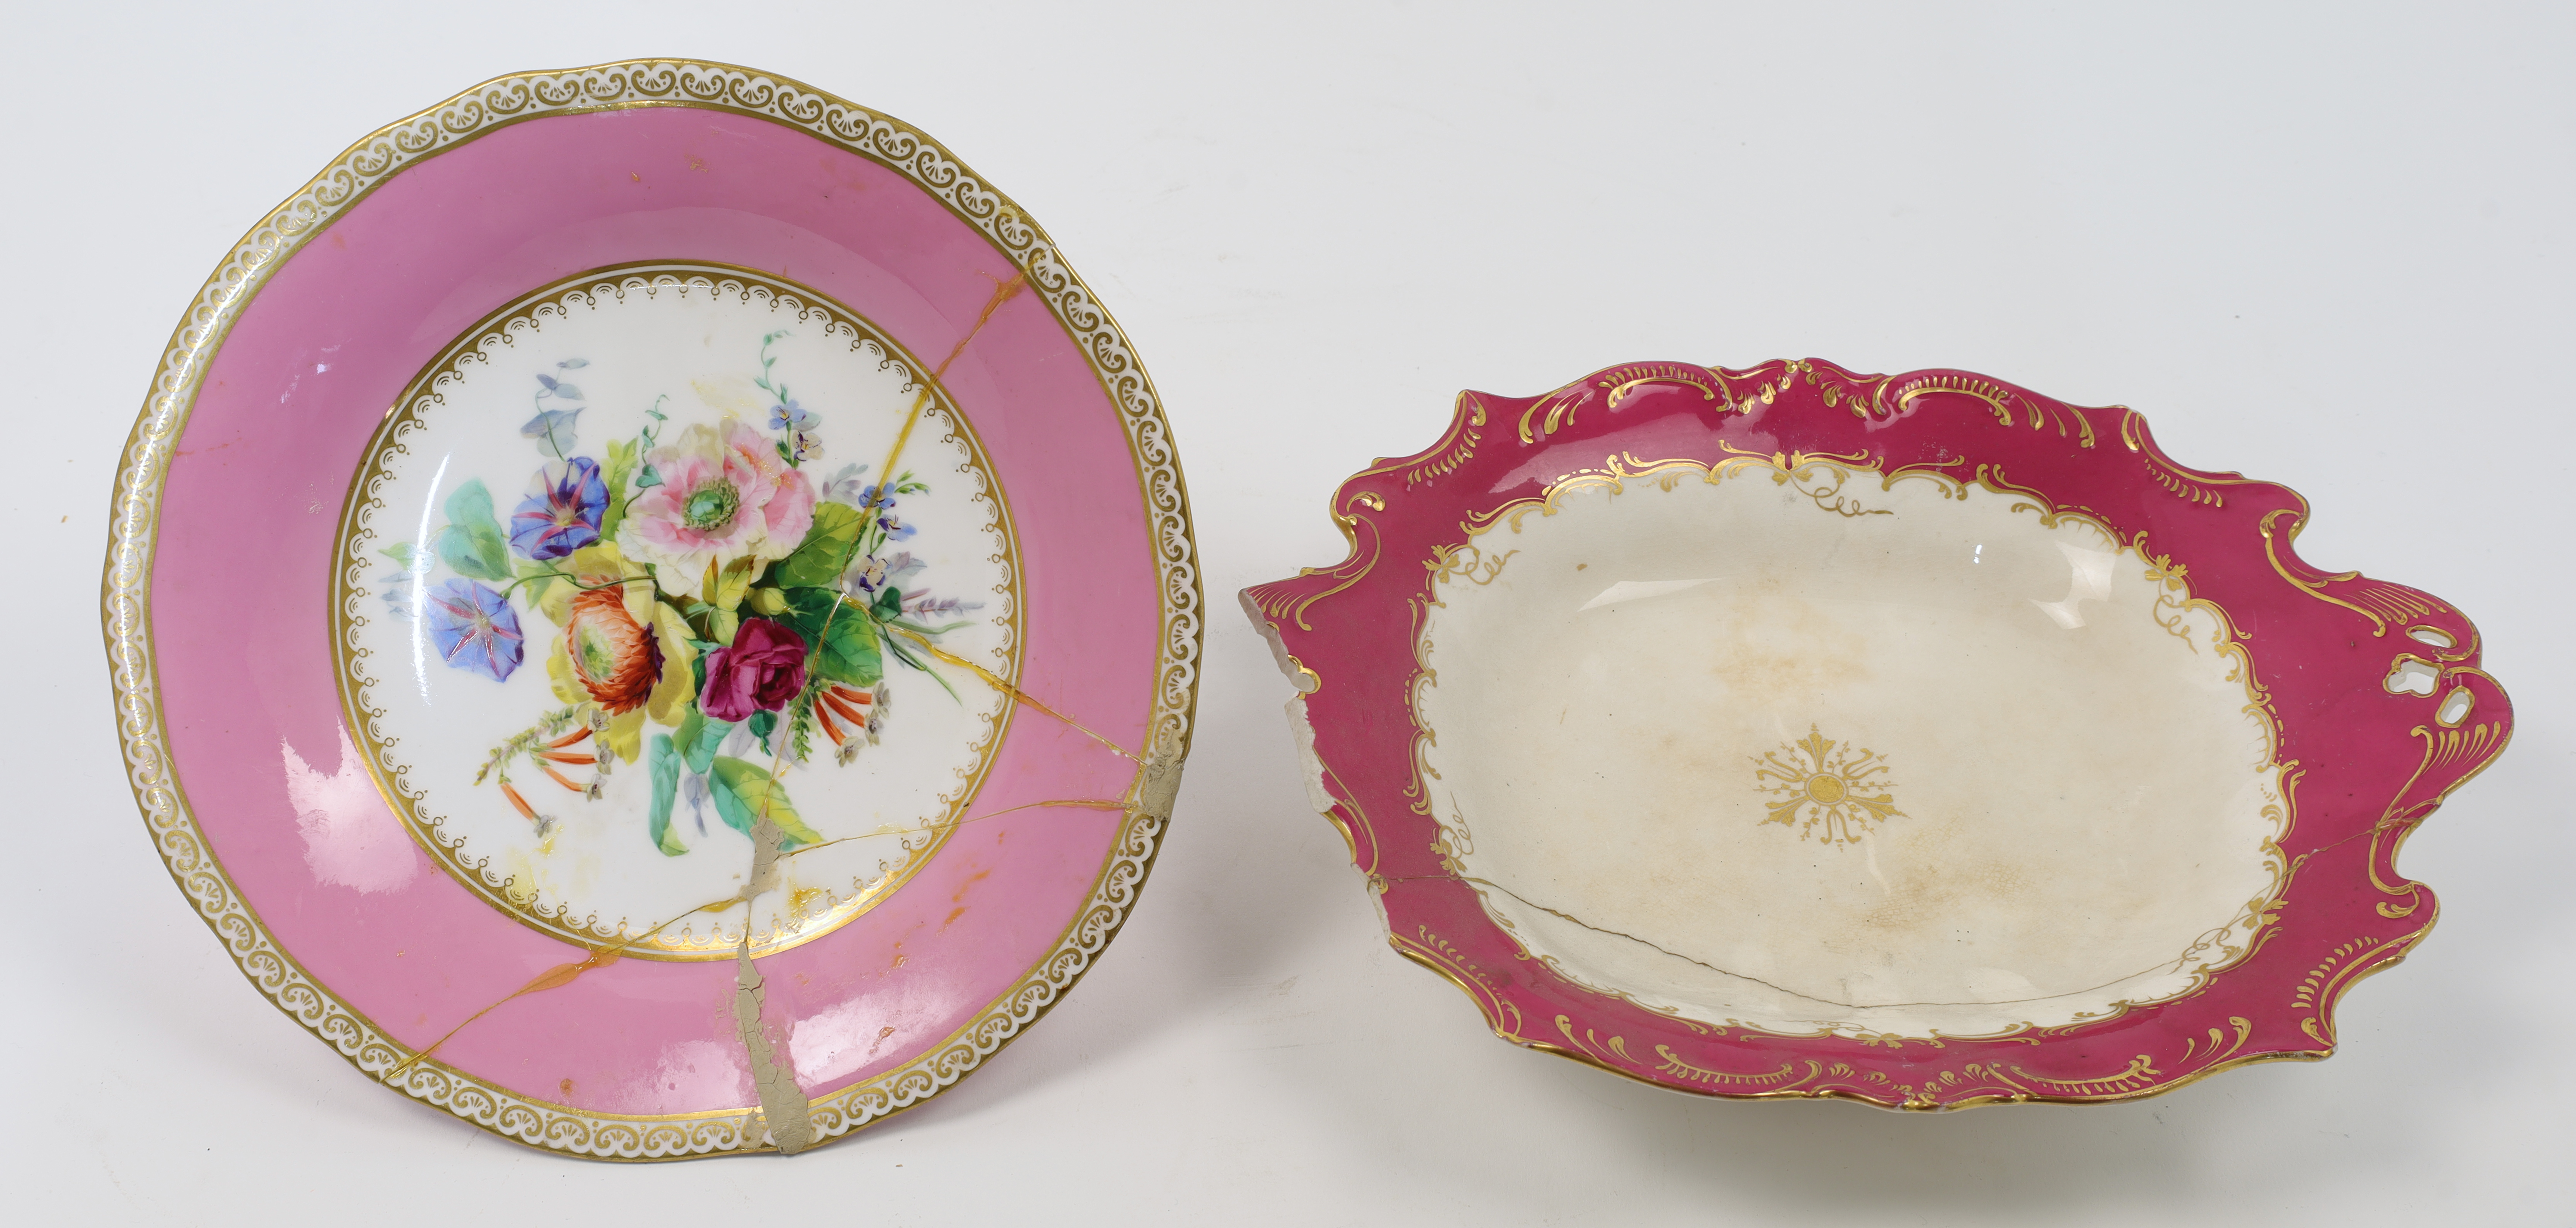 A Copeland porcelain part dessert service, second half 19th century, printed mark with registrati... - Image 2 of 2